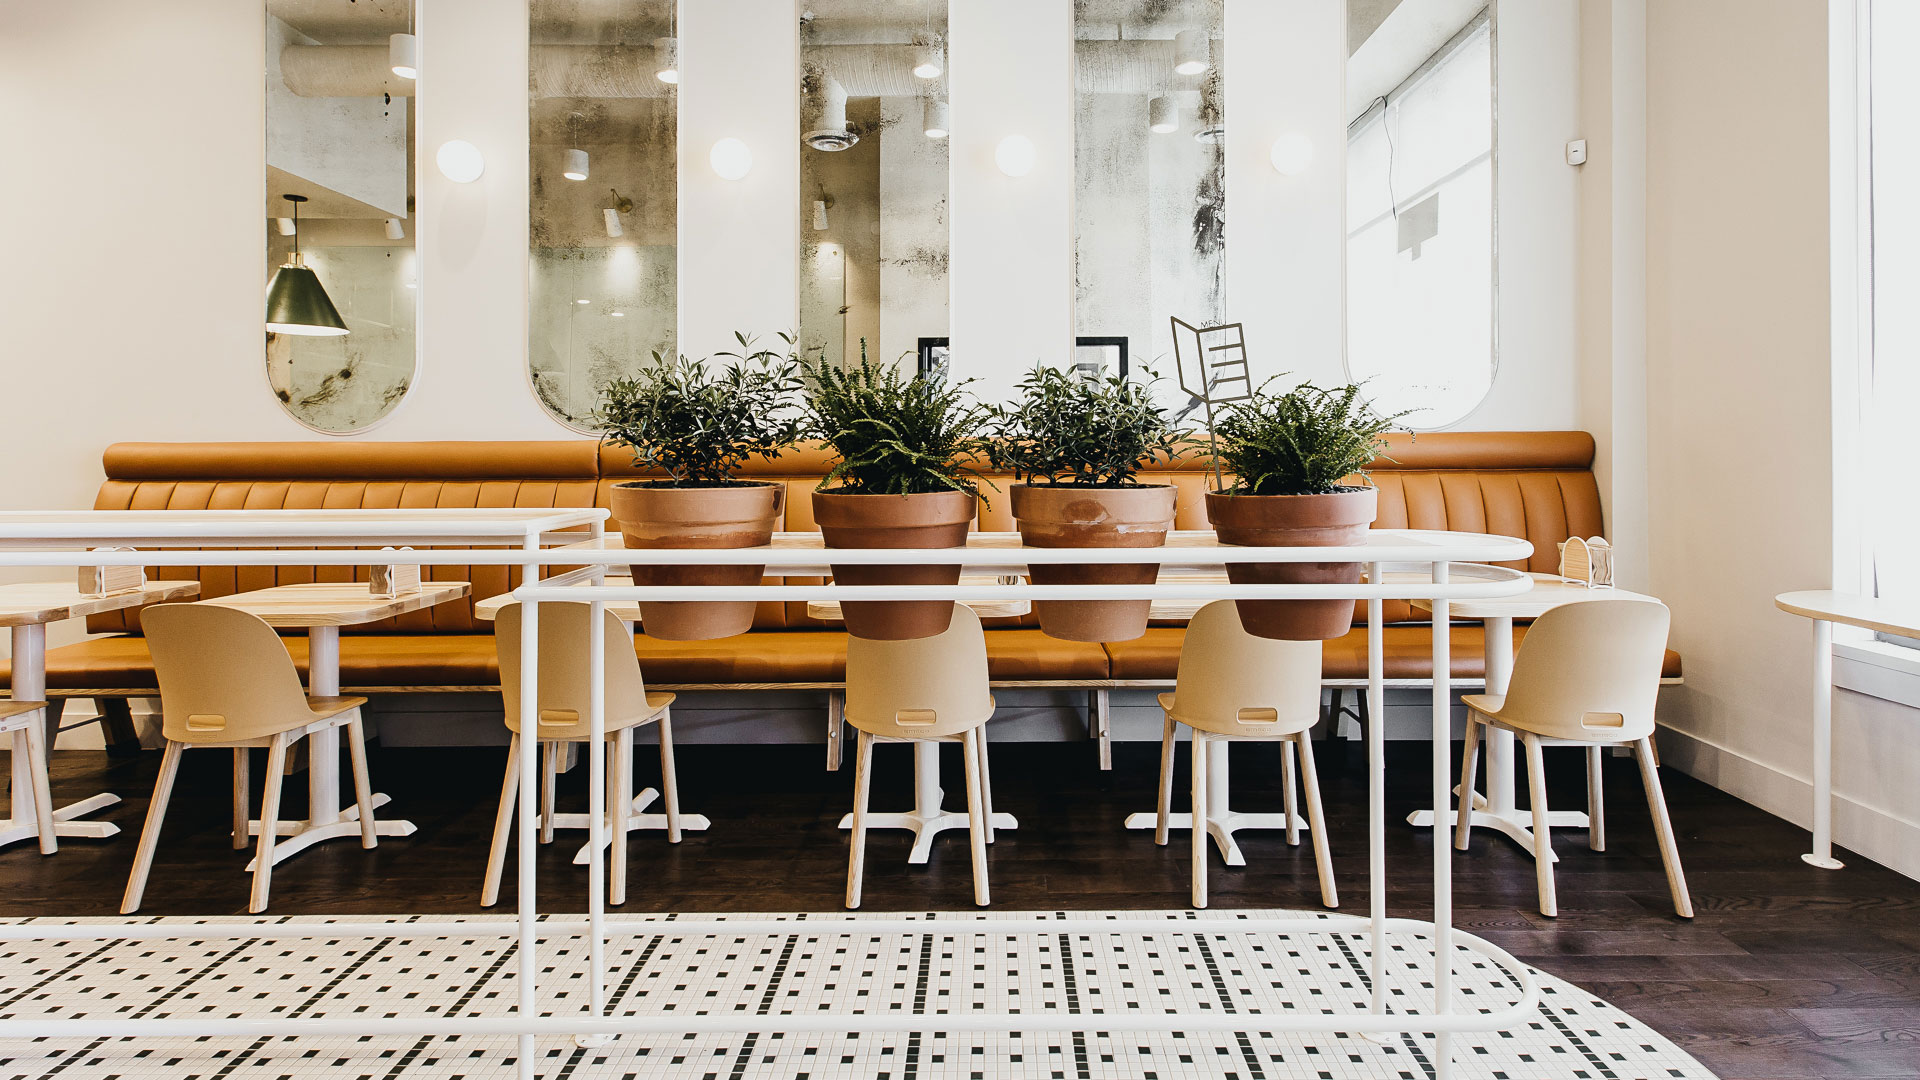 Gray Olive Cafe interior design by Cutler, showing tables, chairs, plants, mirrors, and patterned floor tiles